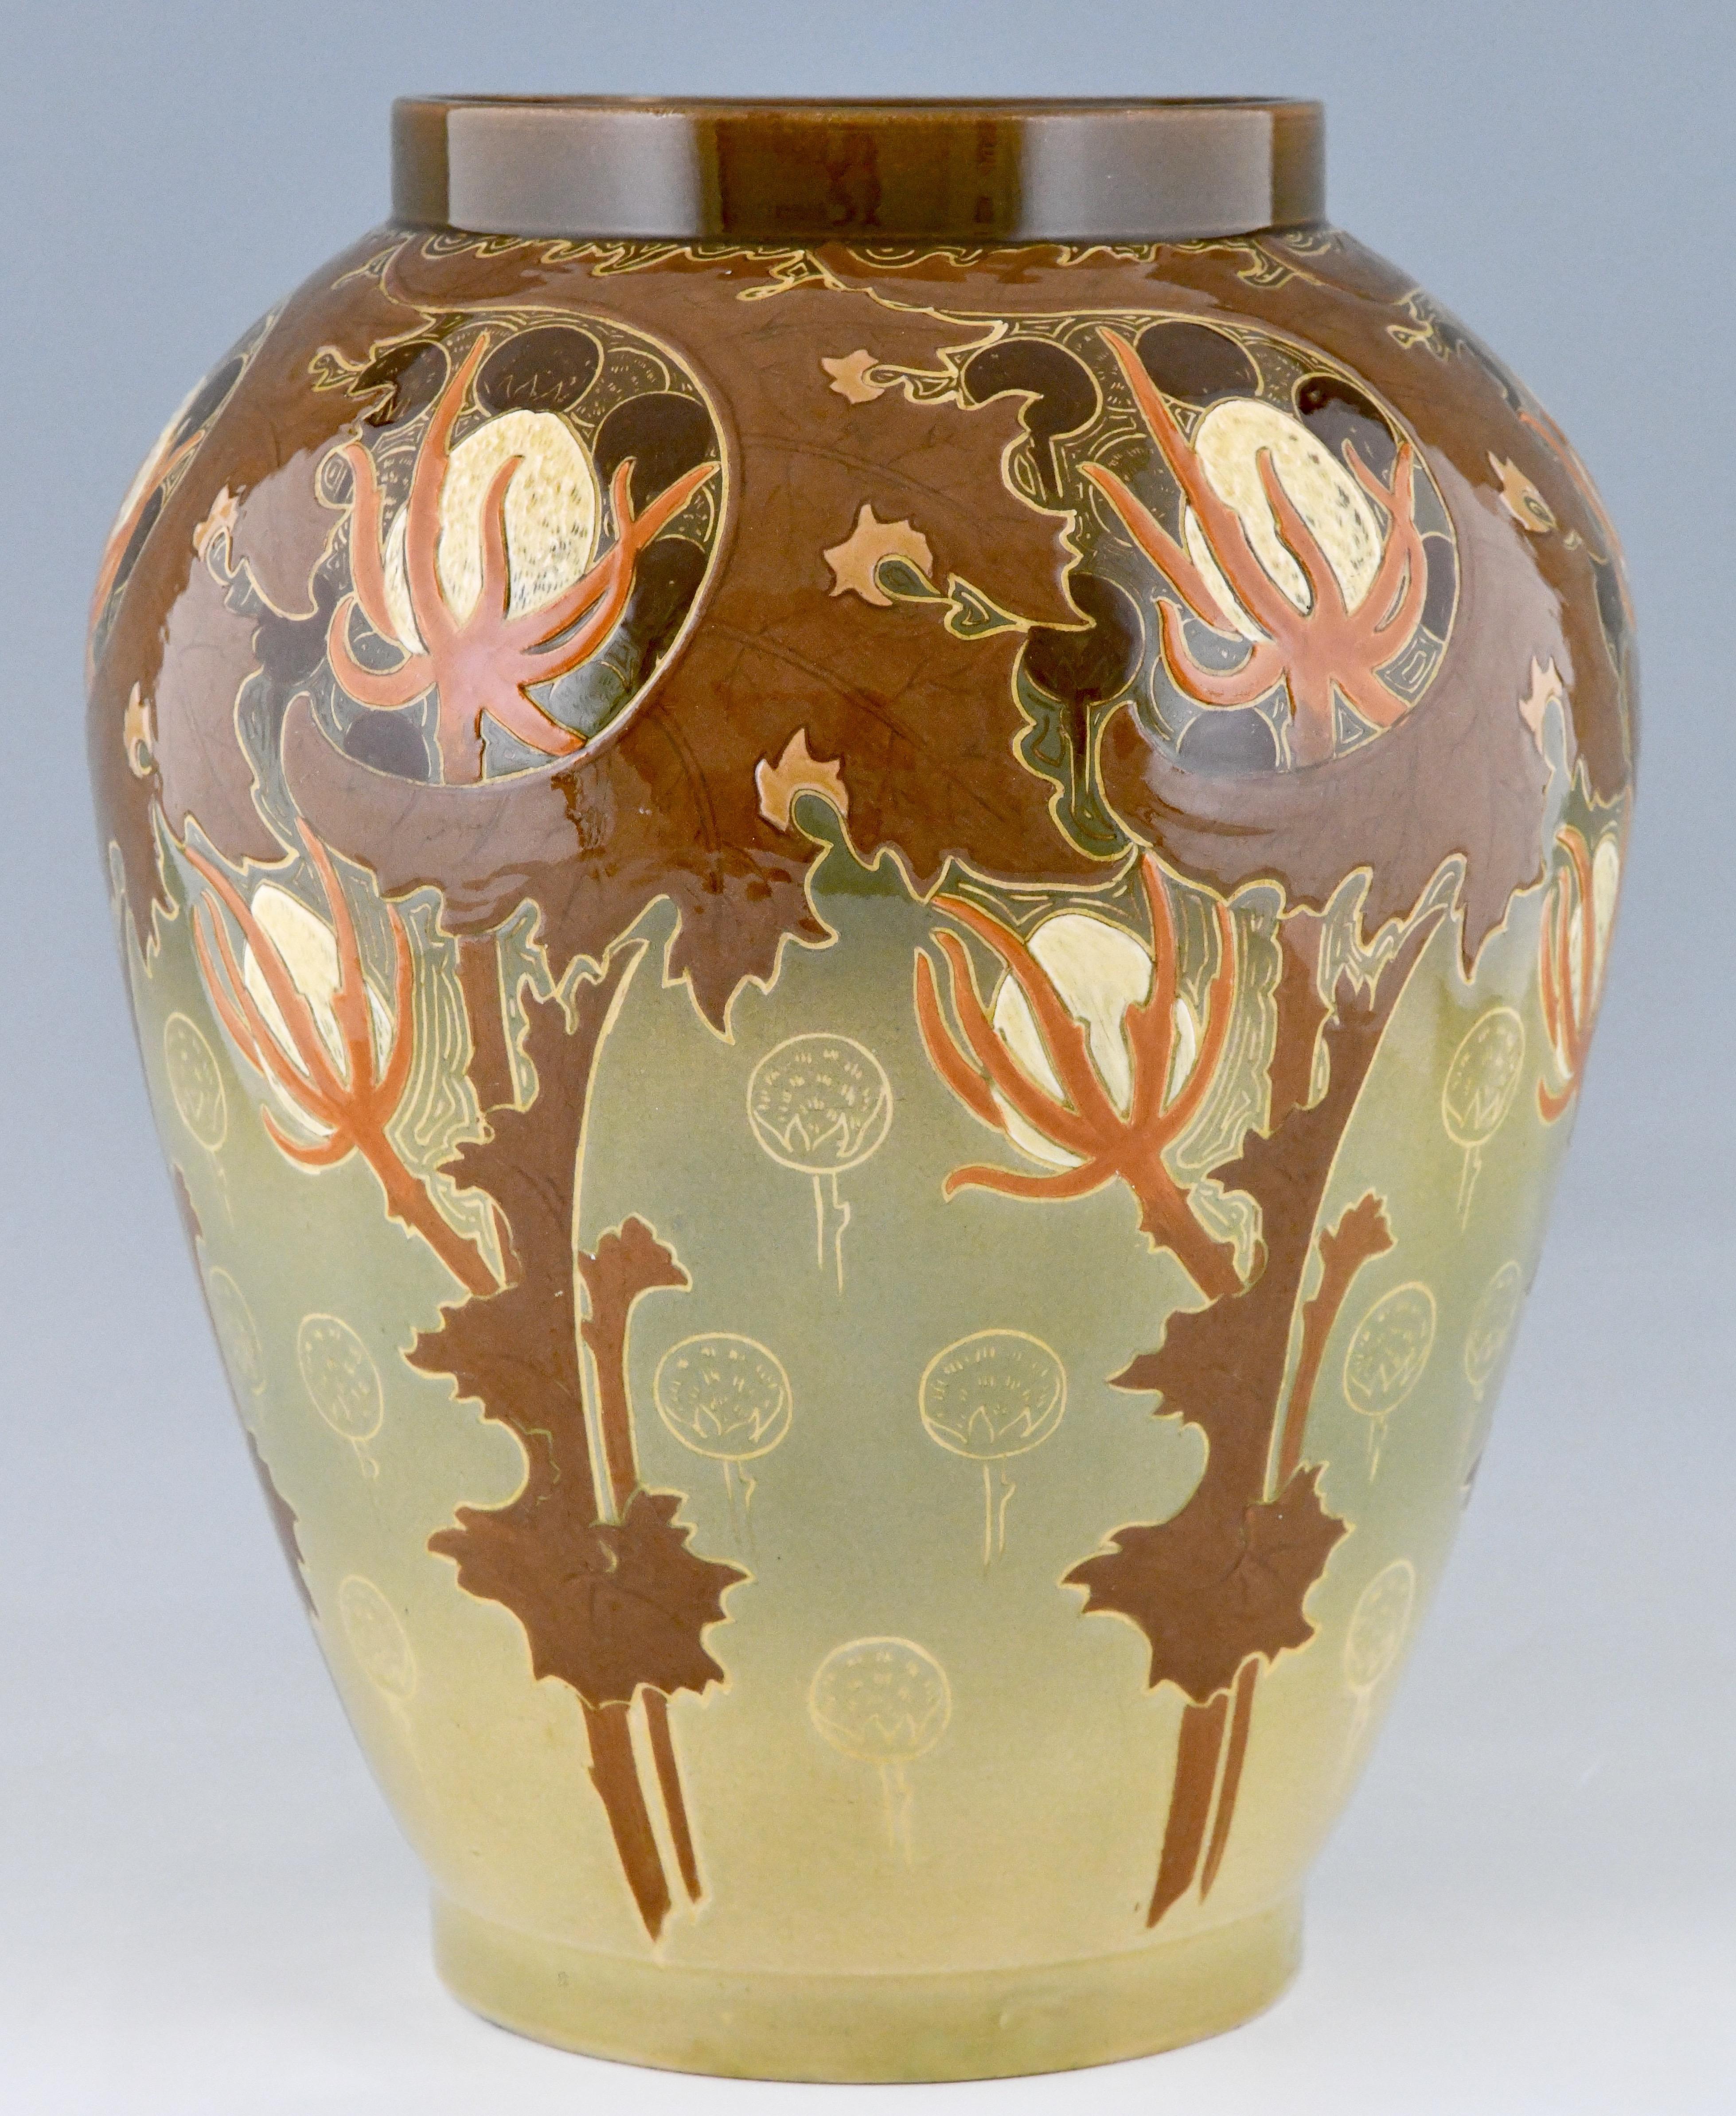 Art Nouveau ceramic vase with flowers by Hippolyte Boulenger, Choisy le Roi. France ca. 1900. Ceramic with incised & glazed decoration of flowers.